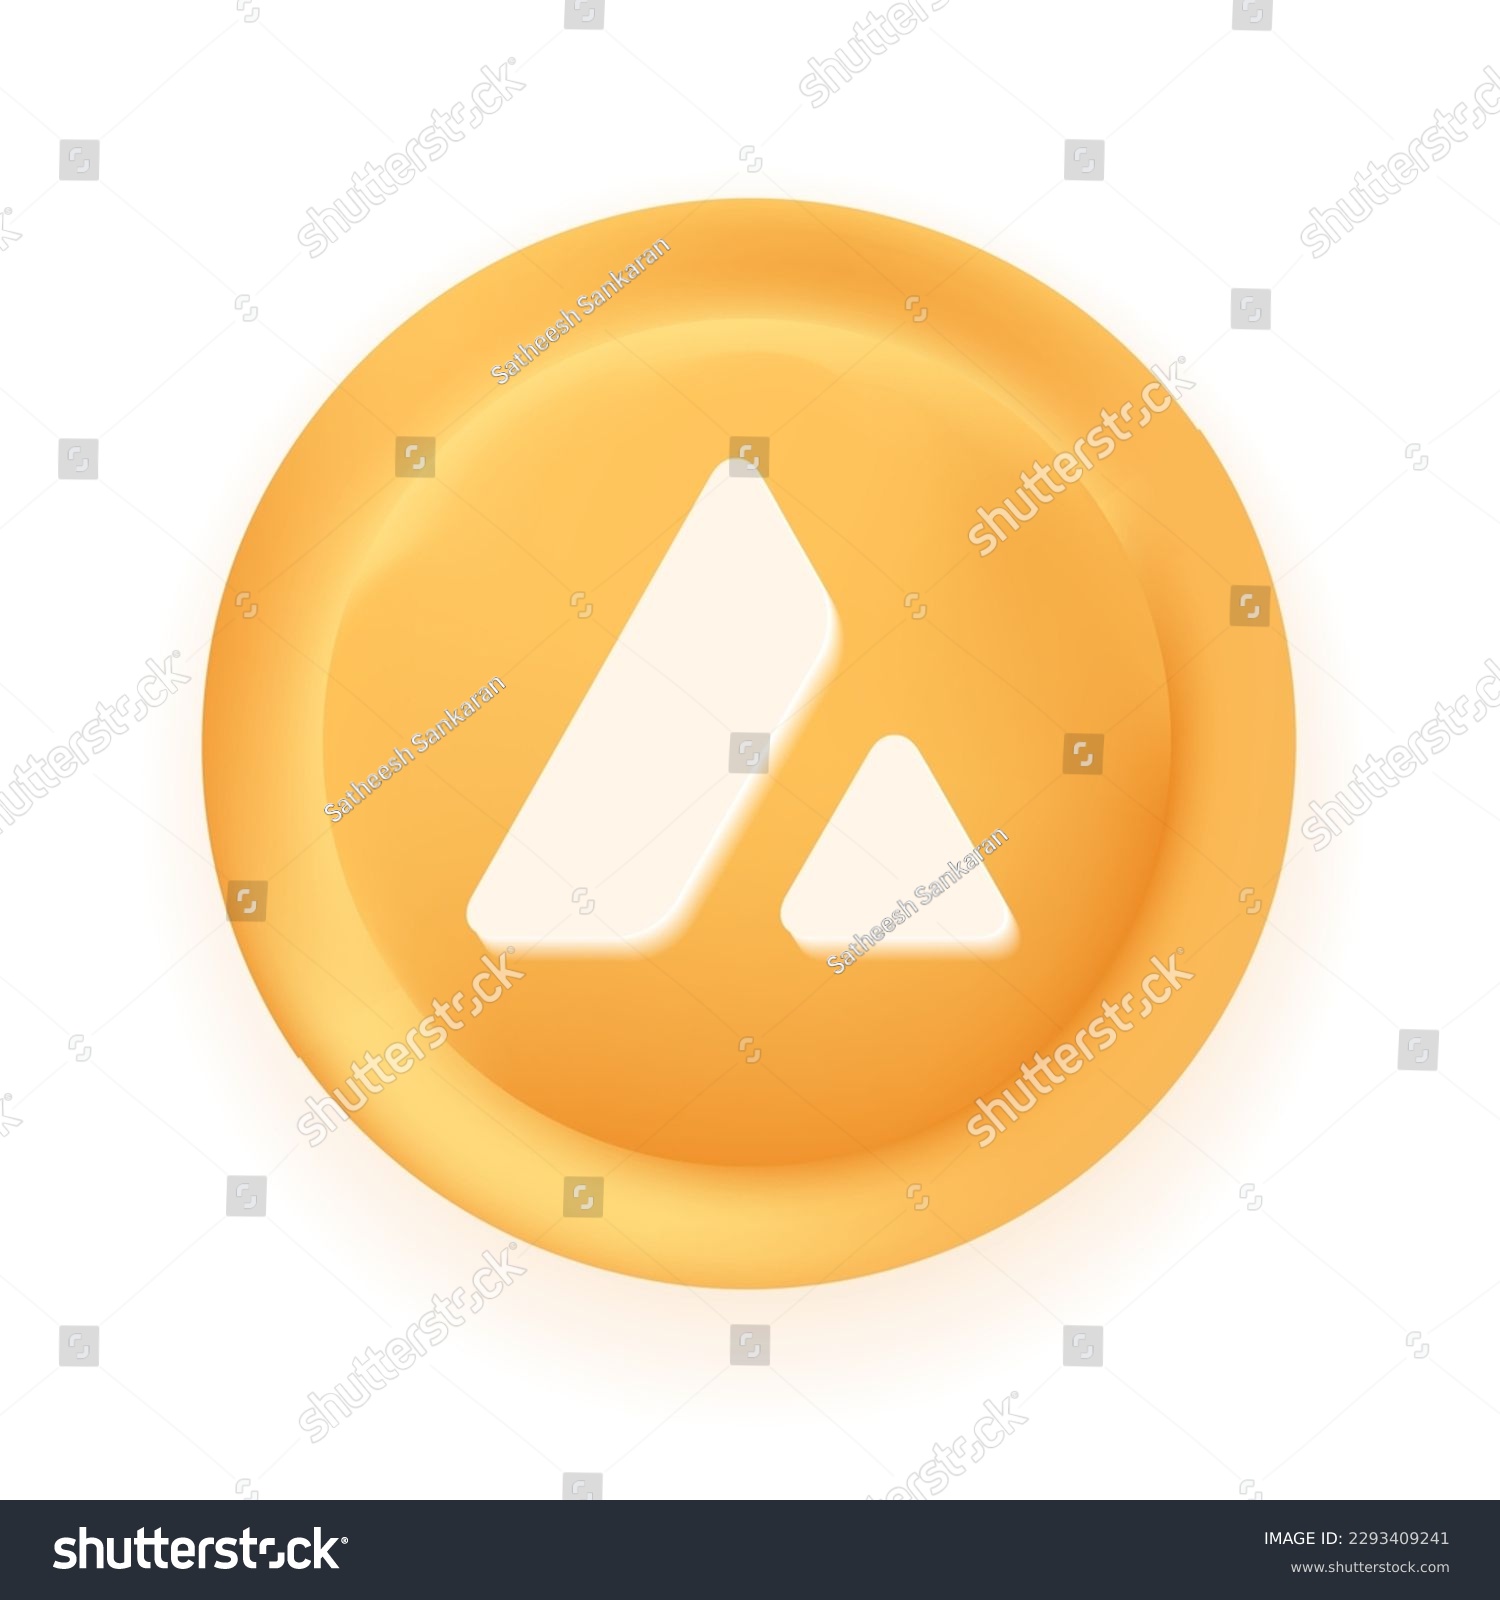 SVG of Avalanche (AVAX) crypto currency 3D coin vector illustration isolated on white background. Can be used as virtual money icon, logo, emblem, sticker and badge designs. svg